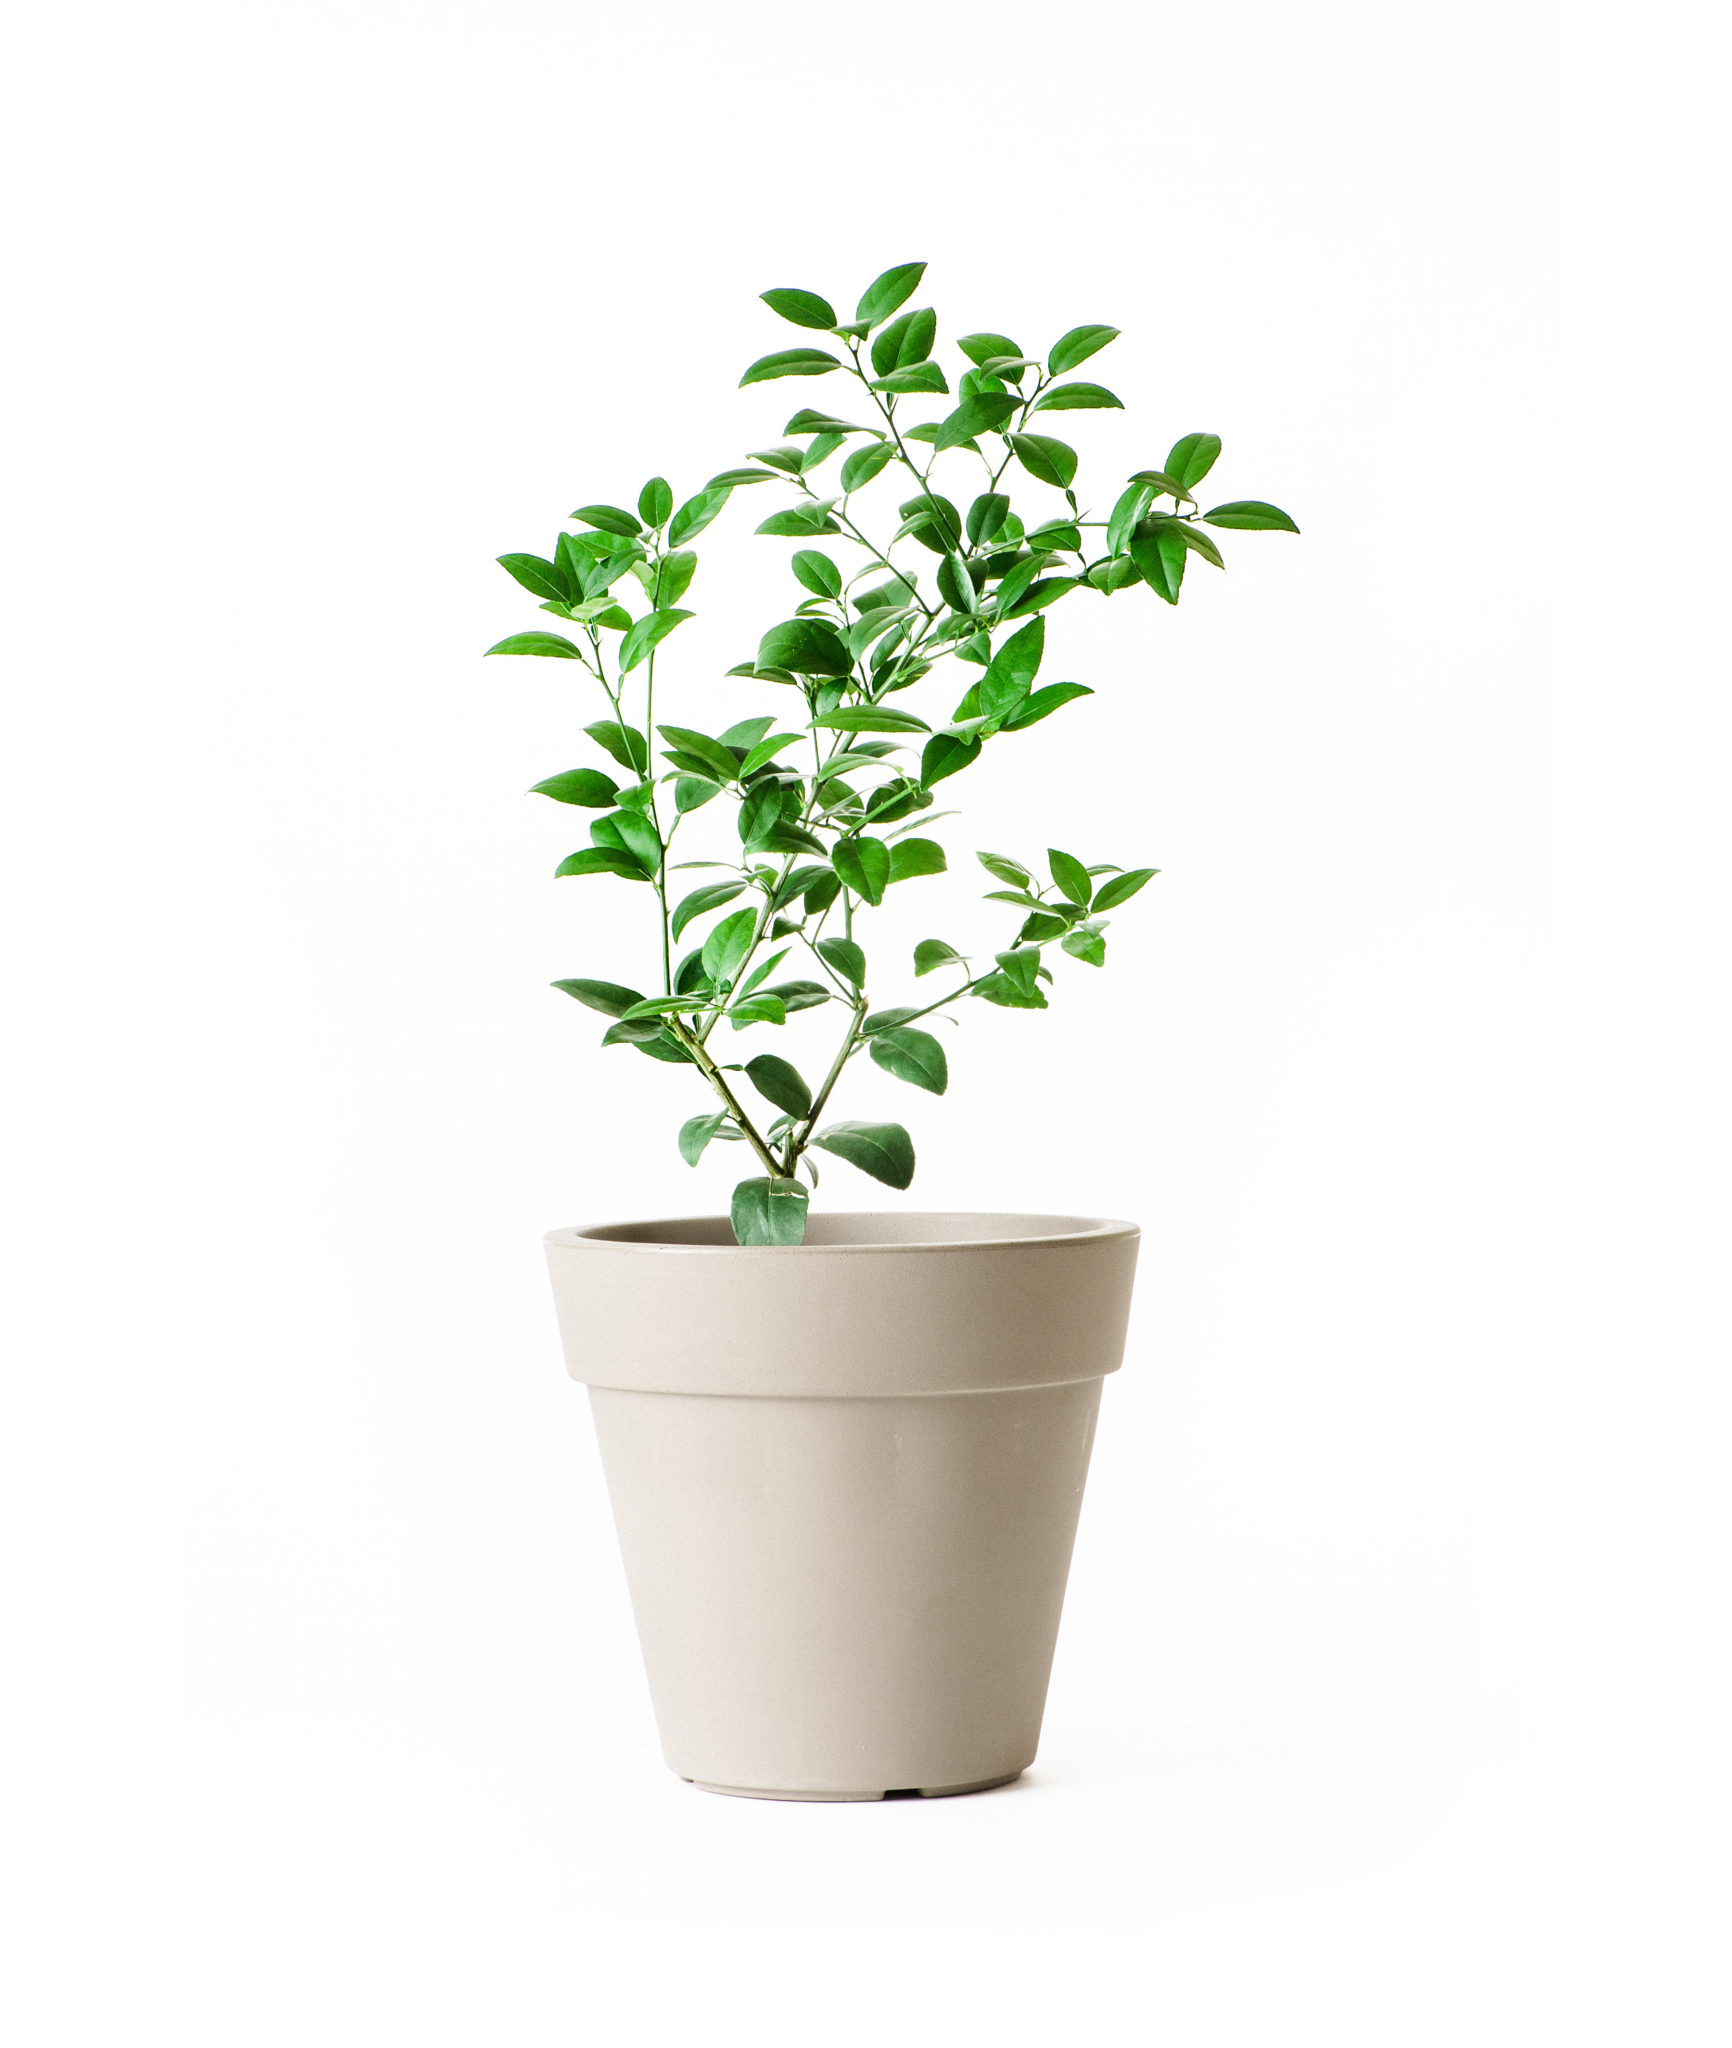 Image of Dwarf Key Lime Tree (Age: 1 Year Height: 18 - 26 IN)